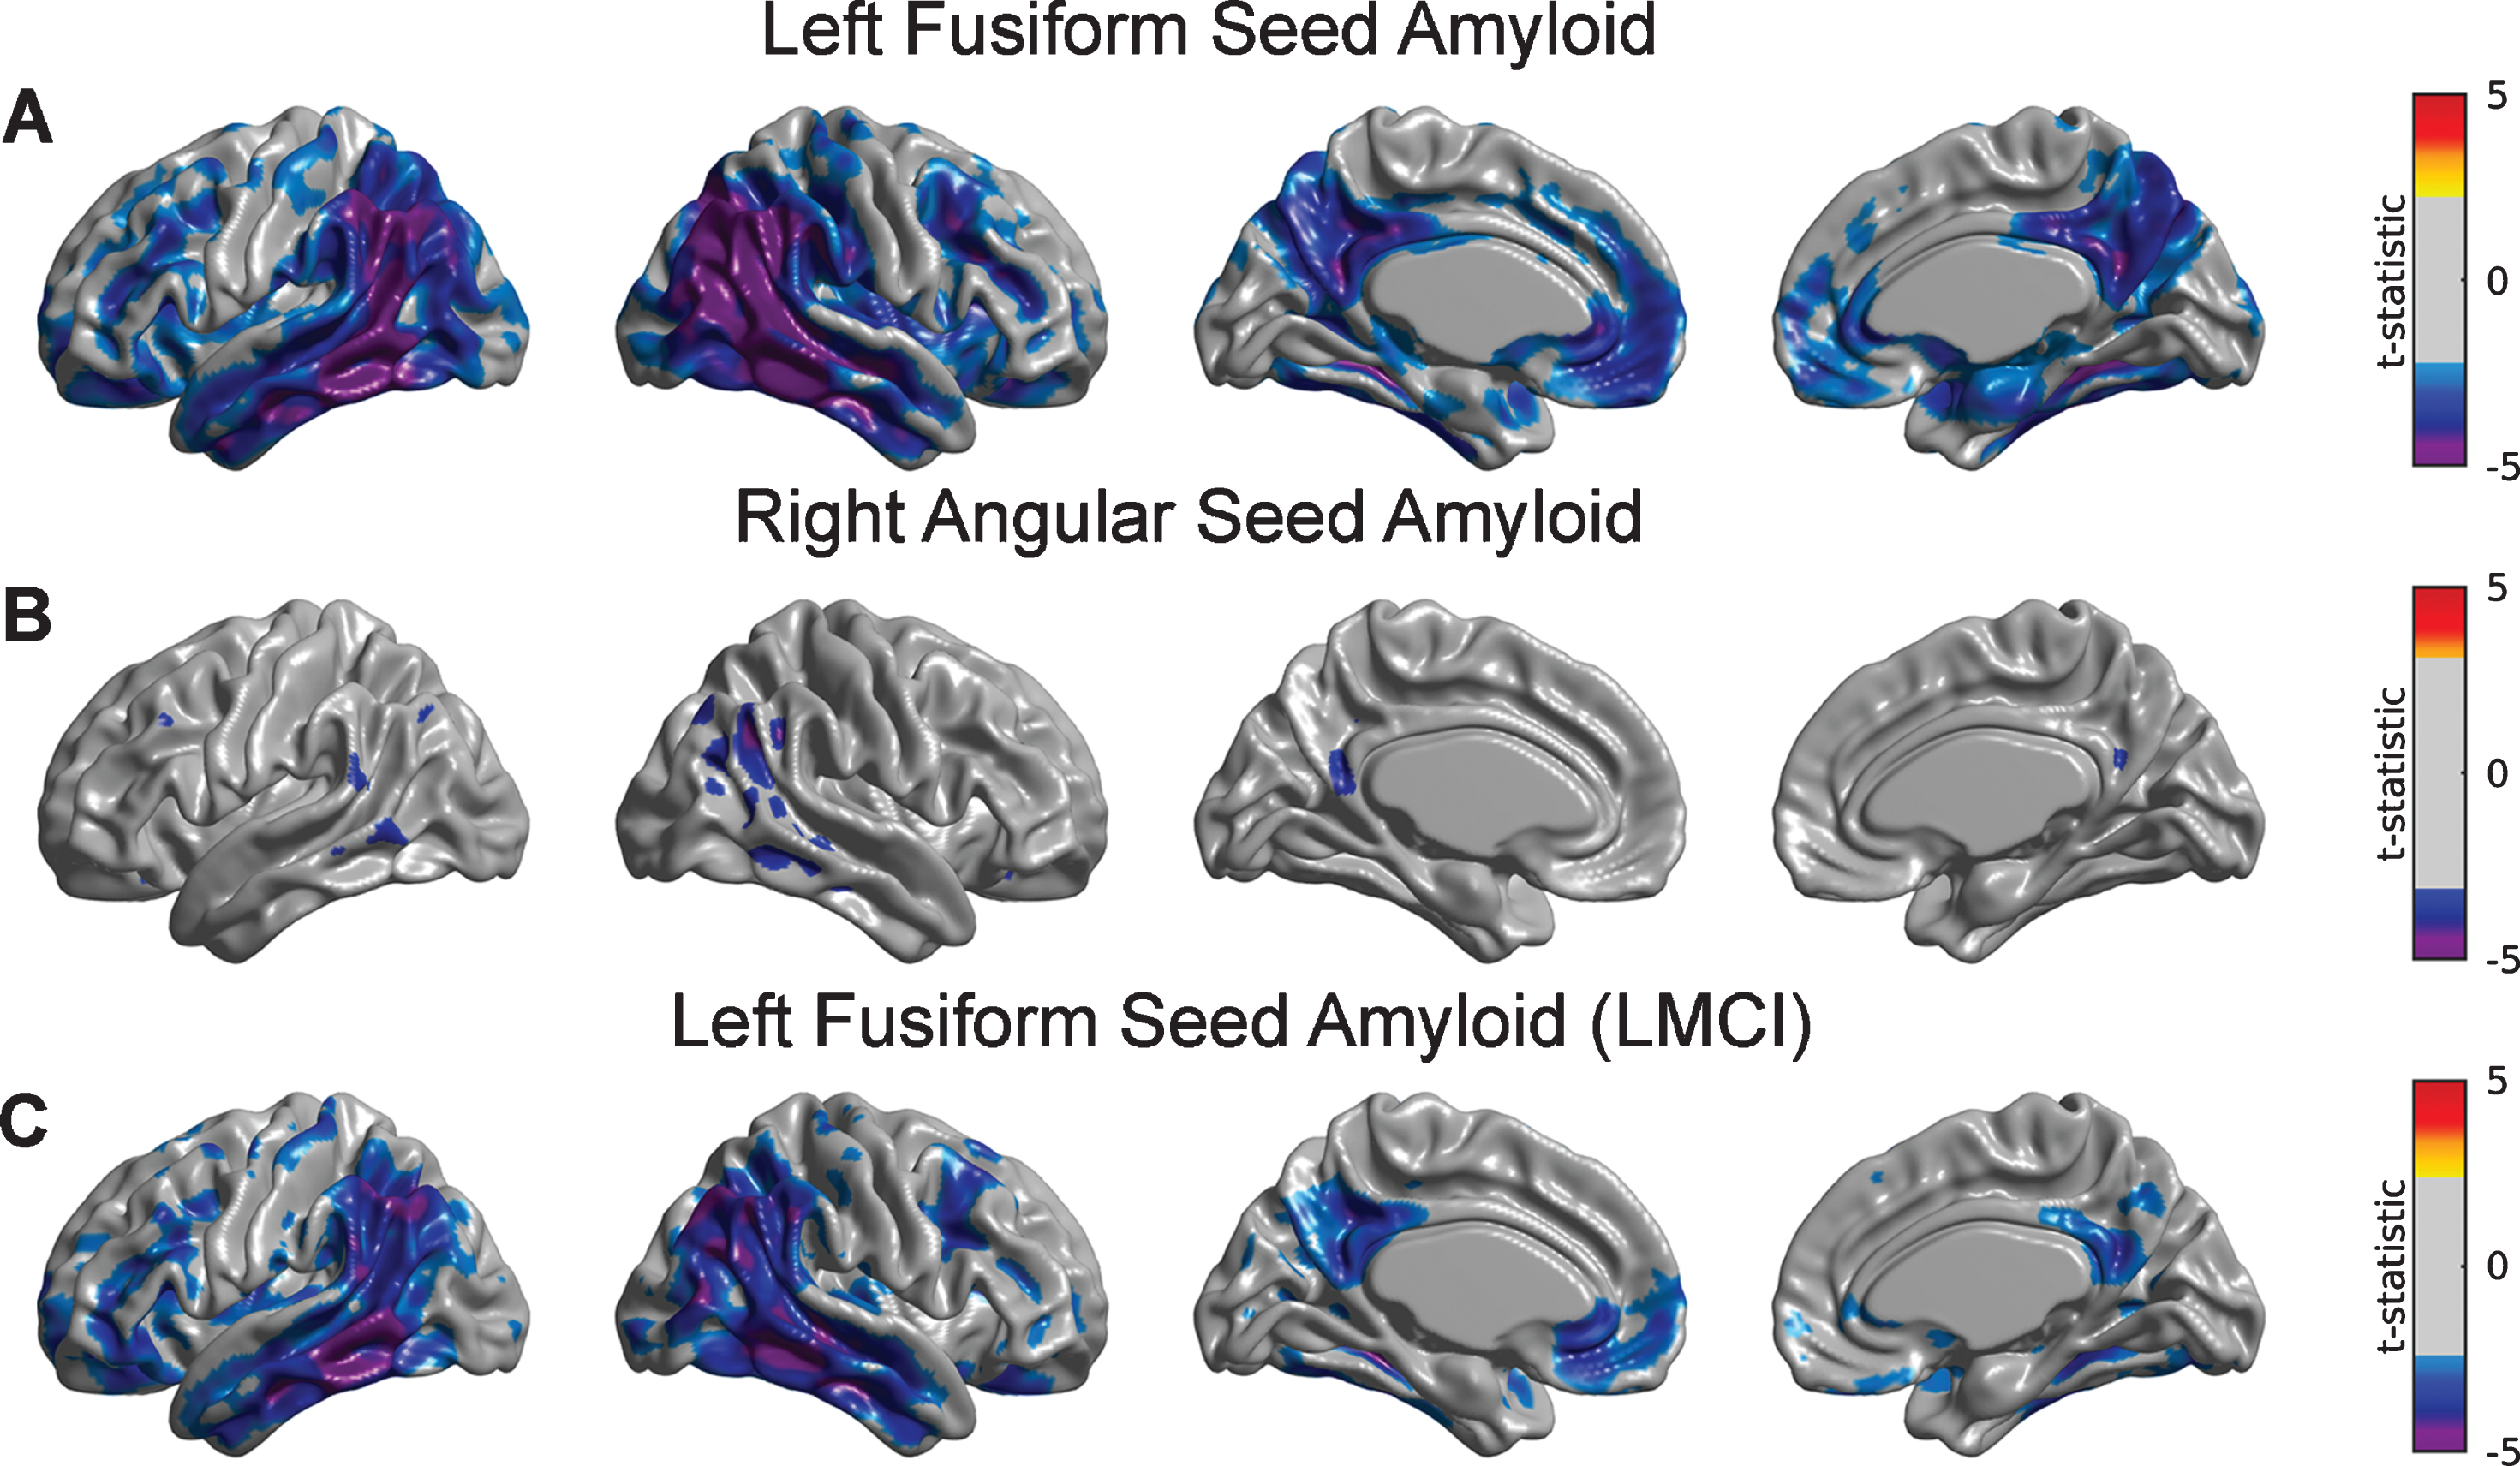 Statistical assessment of seed-based Aβ predictors on glucose metabolism. Cortical surface projections of FDR-thresholded statistically significant regions for the main effect of (A) LFUSI amyloid seed and (B) RANG amyloid seed on metabolism. The Aβ LFUSI seed predicts a significant reduction of glucose metabolism mainly in the inferior temporo-parietal cortex, posterior cingulate cortex, and precuneus. The Aβ RANG seed only predicts a spatially concurrent significant reduction of metabolism in the right angular gyrus itself. C) Effect of LFUSI amyloid seed in metabolism corresponding to the LMCI cohort. Significant regions essentially match those for the case of the whole sample.